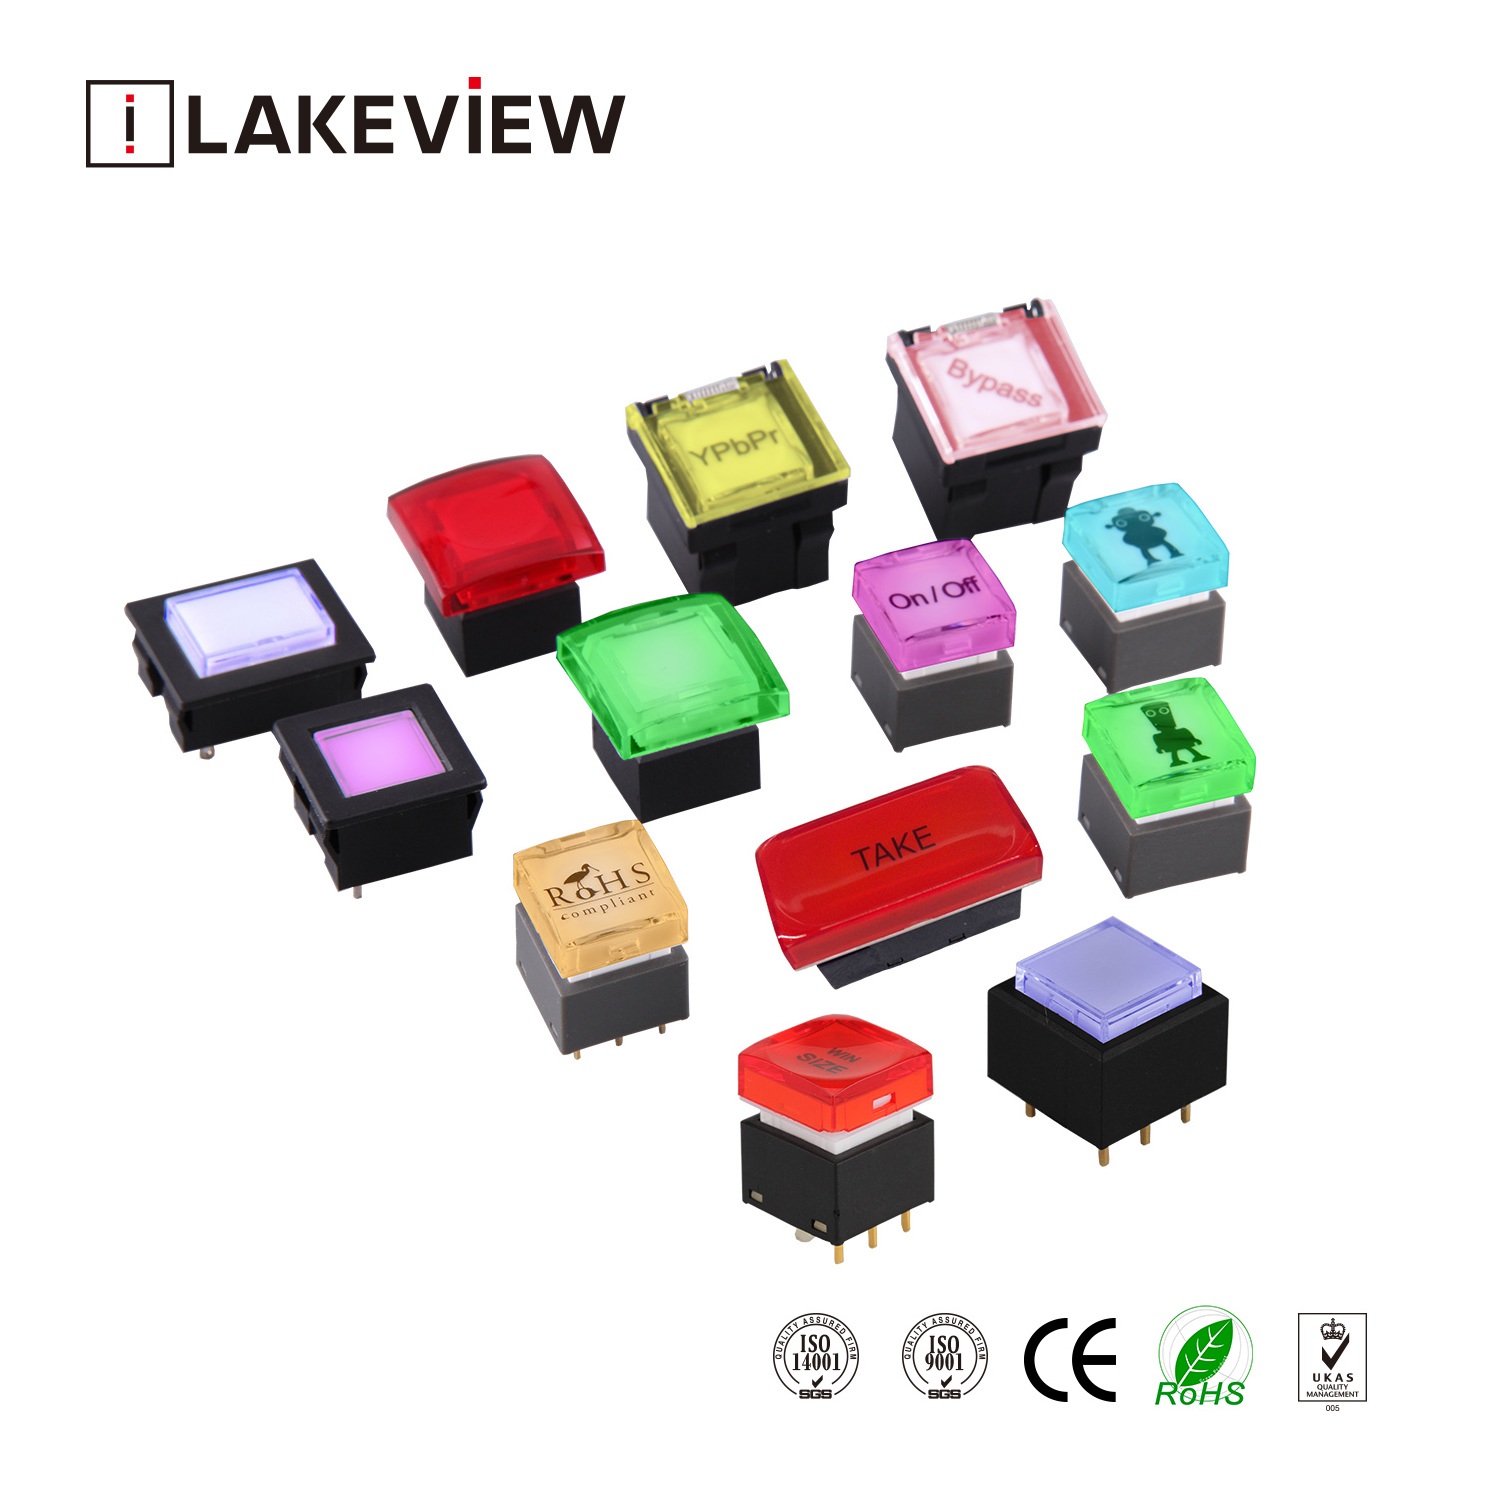 PLB Series LED Push Button Switches